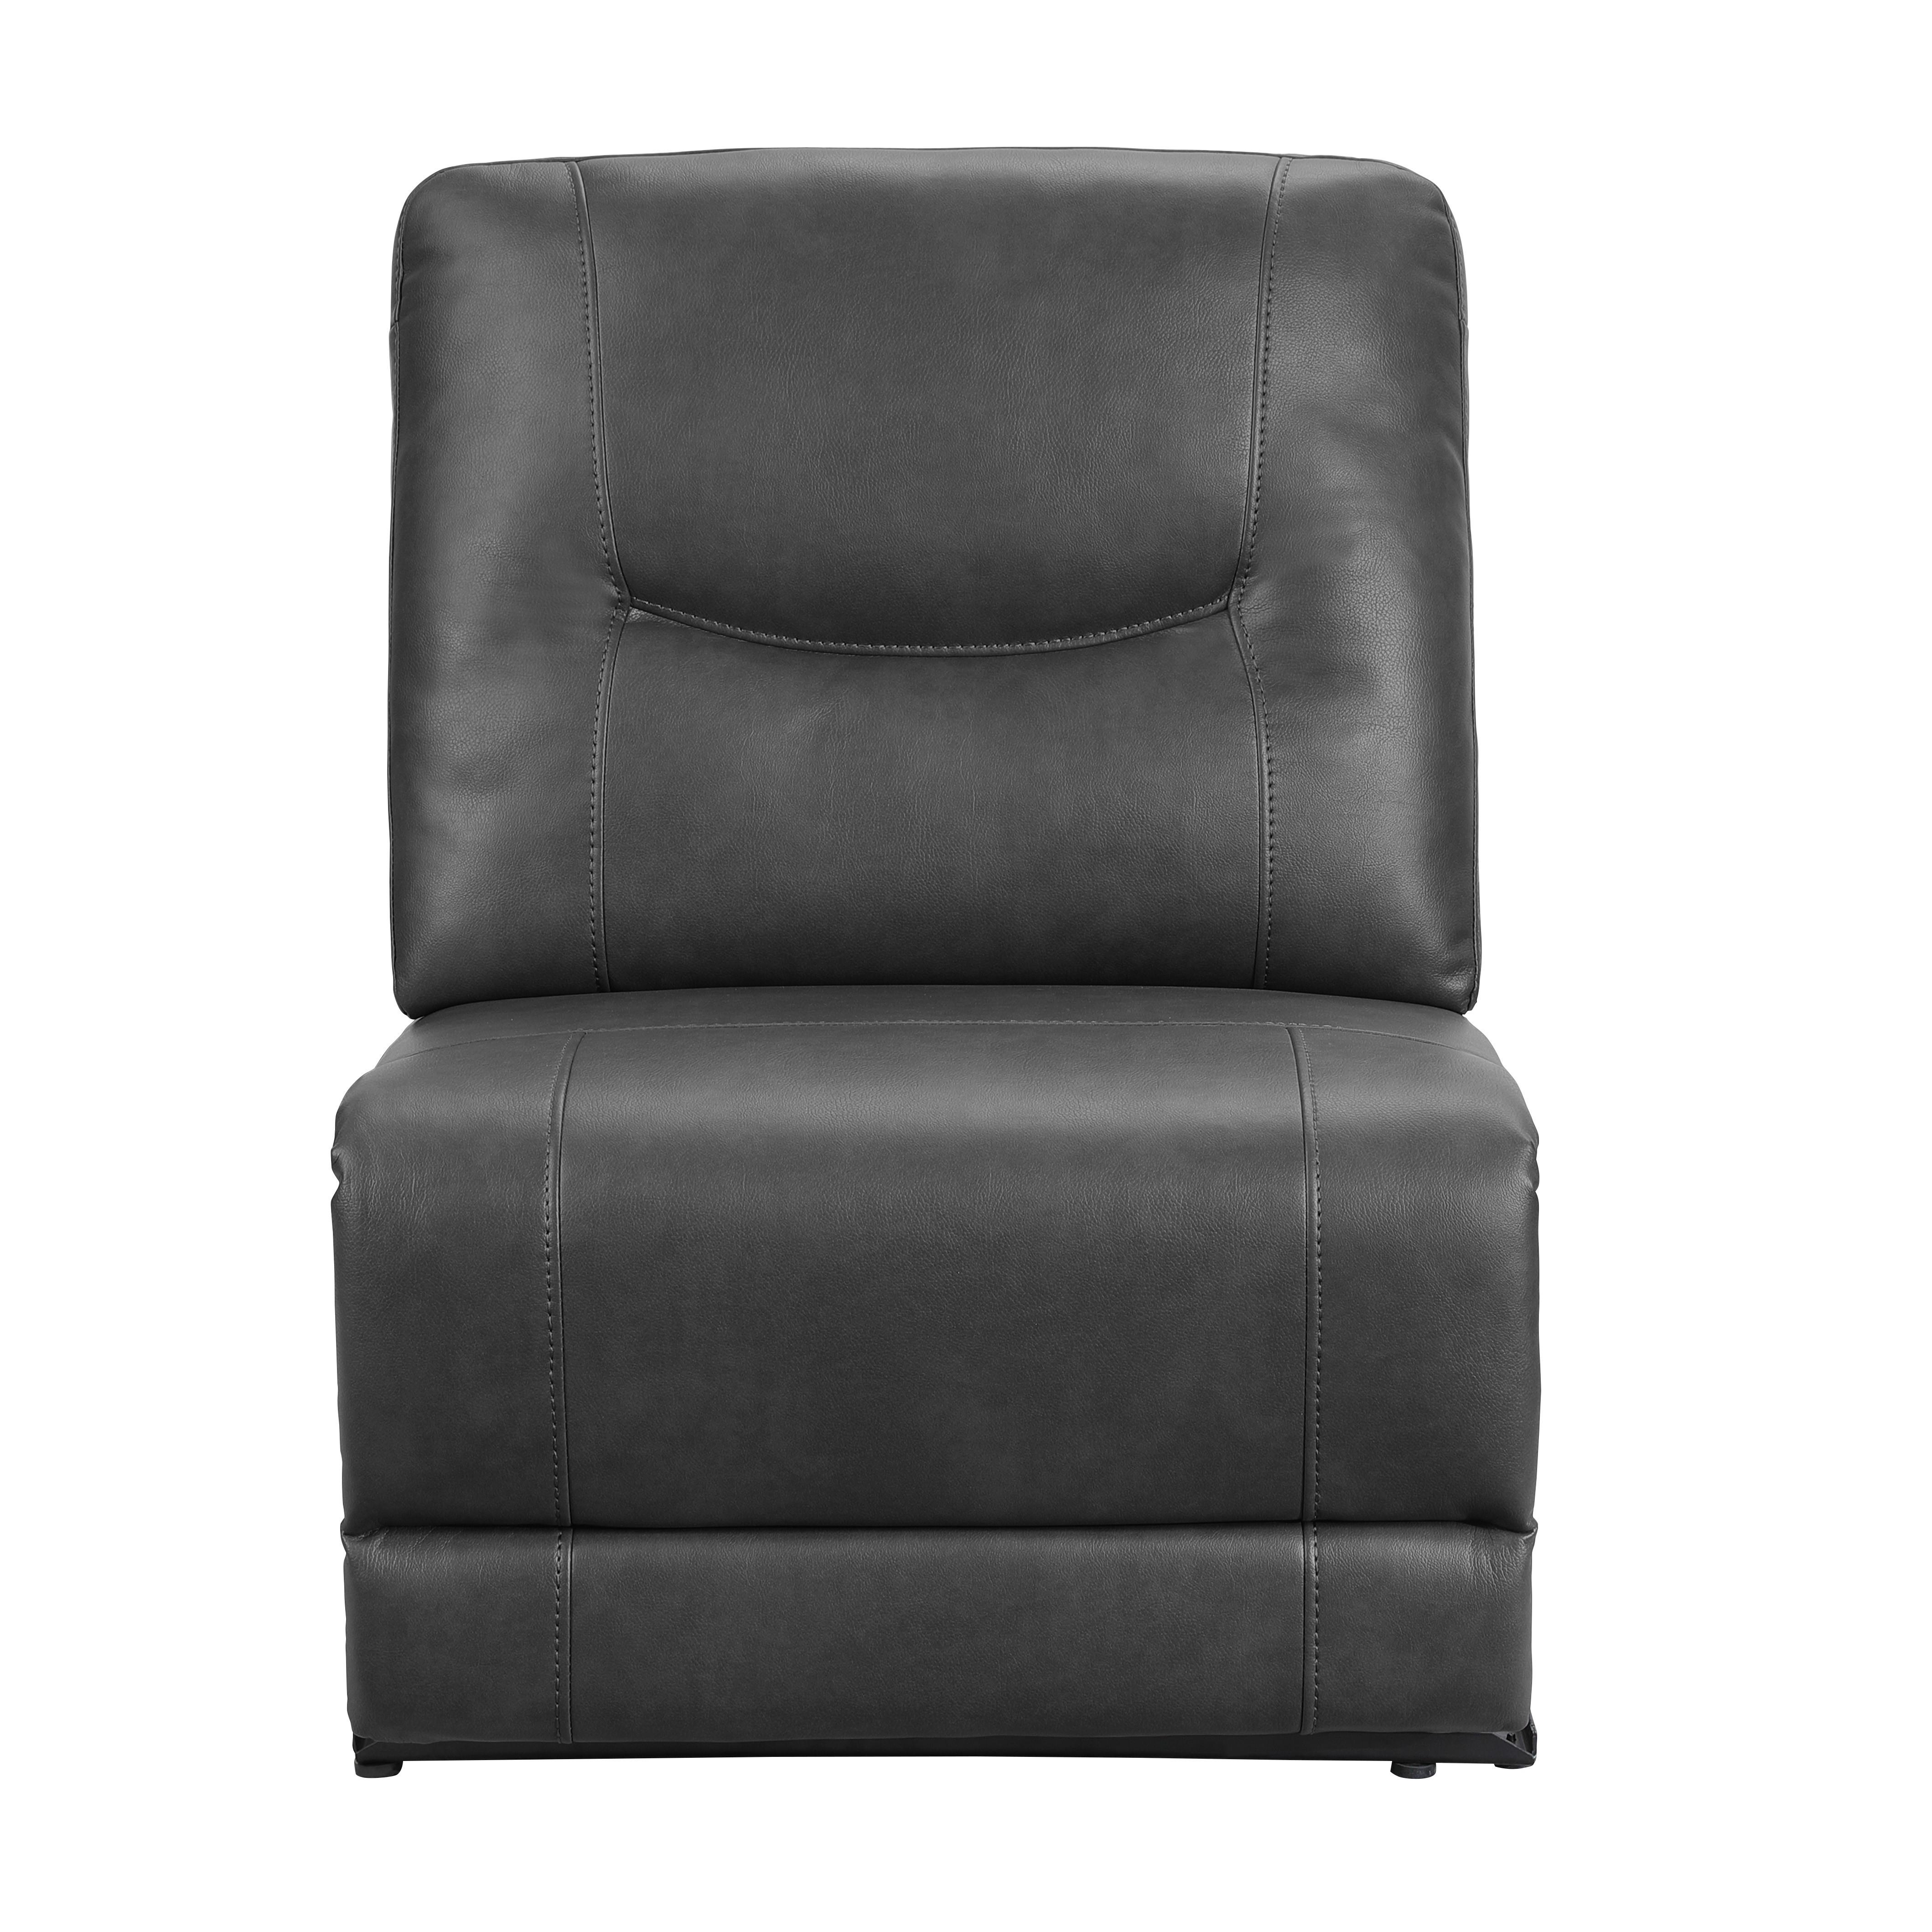 Modern Armless Reclining Chair 8490GRY-AR Columbus 8490GRY-AR in Gray Faux Leather